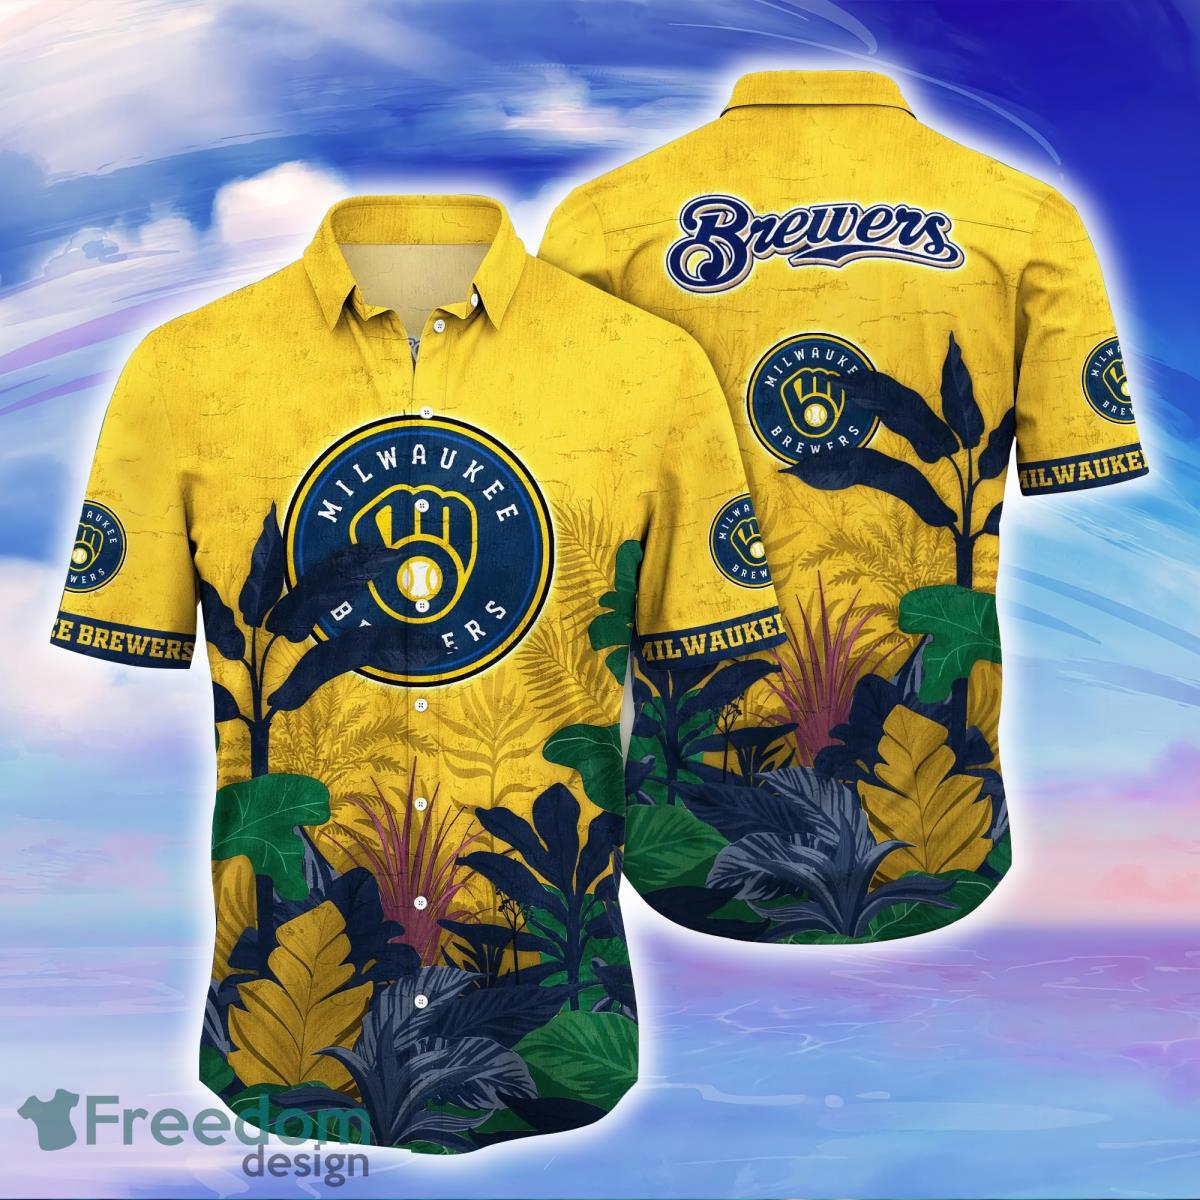 brewers jersey 2021